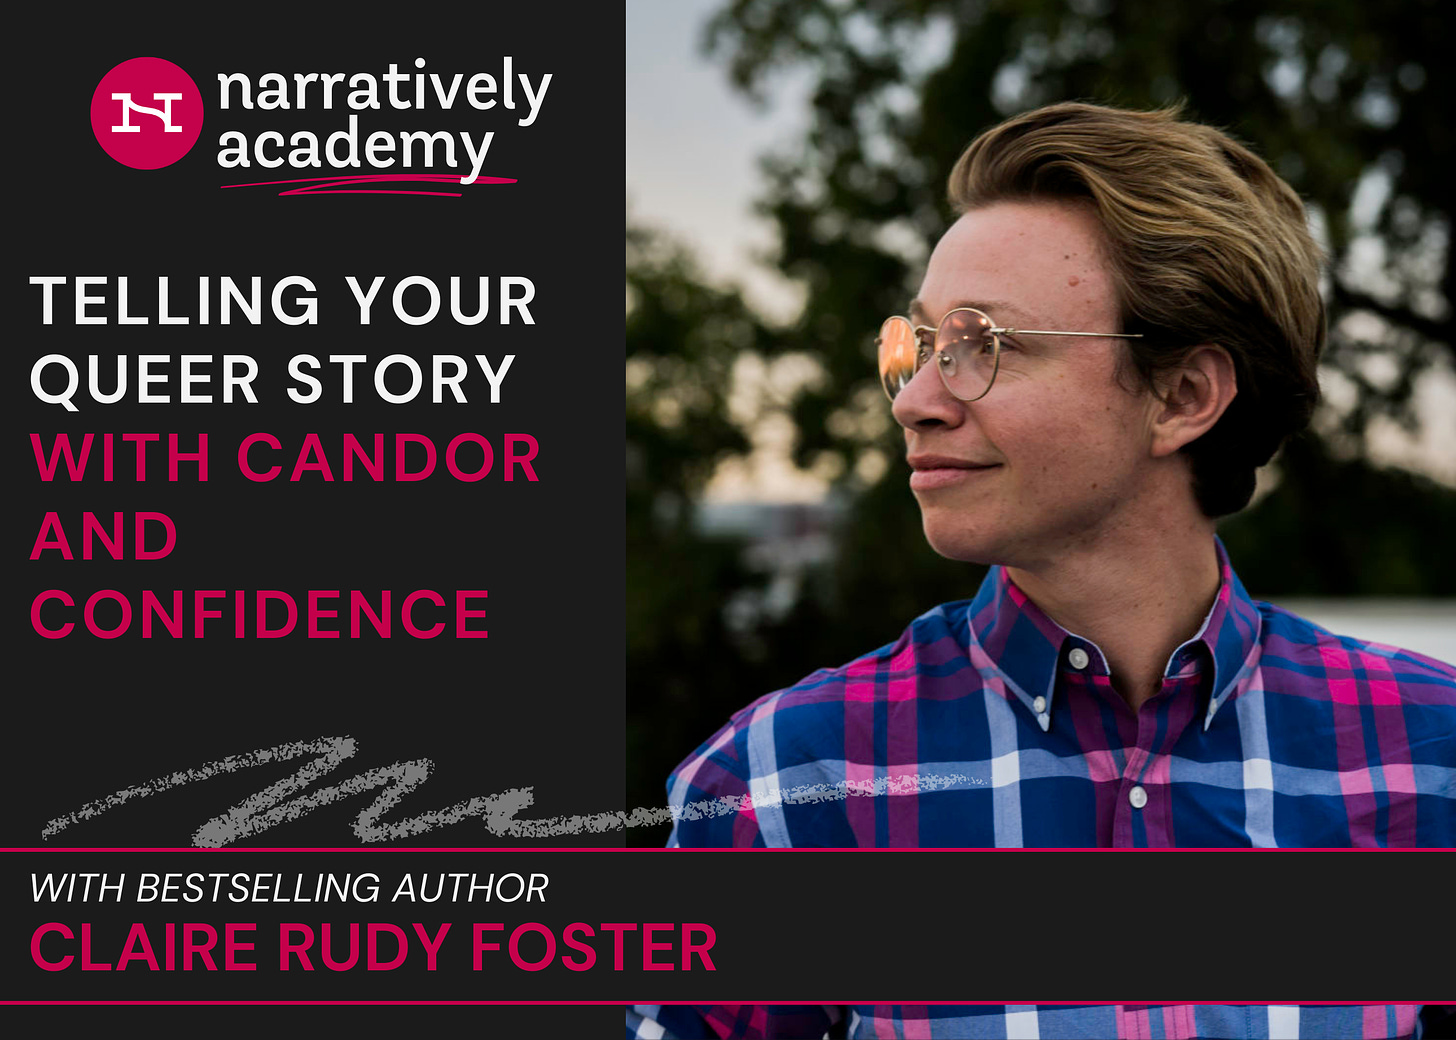 A promotional image for the Narratively Academy workshop called "Telling Your Queer Story with Candor and Confidence" featuring a photo of the workshop presenter, bestselling author Claire Rudy Foster, wearing a blue and pink plaid shirt